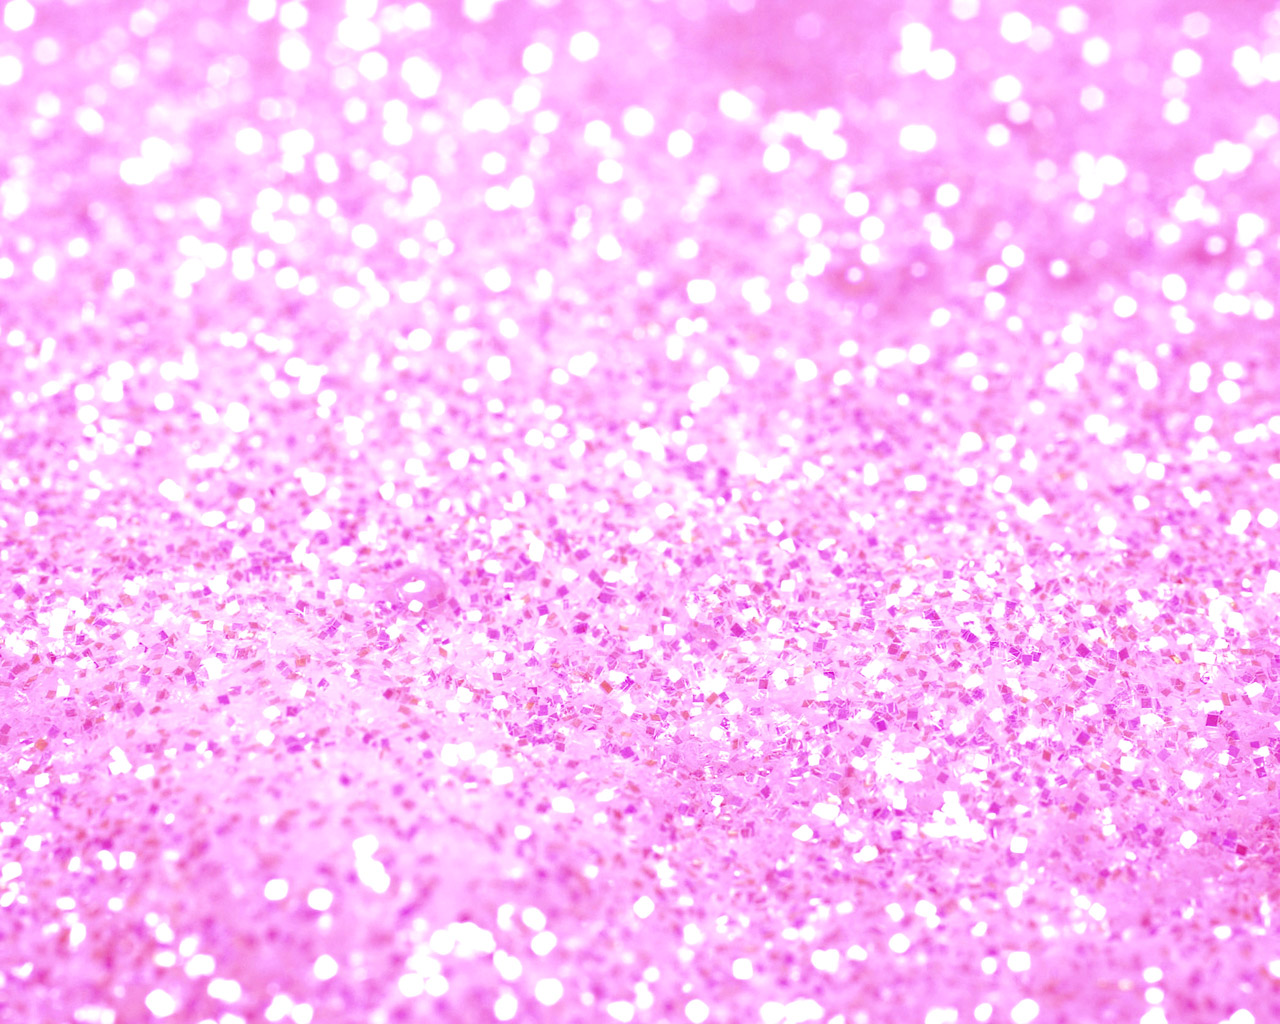 Cute Sparkly Backgrounds Backgrounds Cool Backgrounds